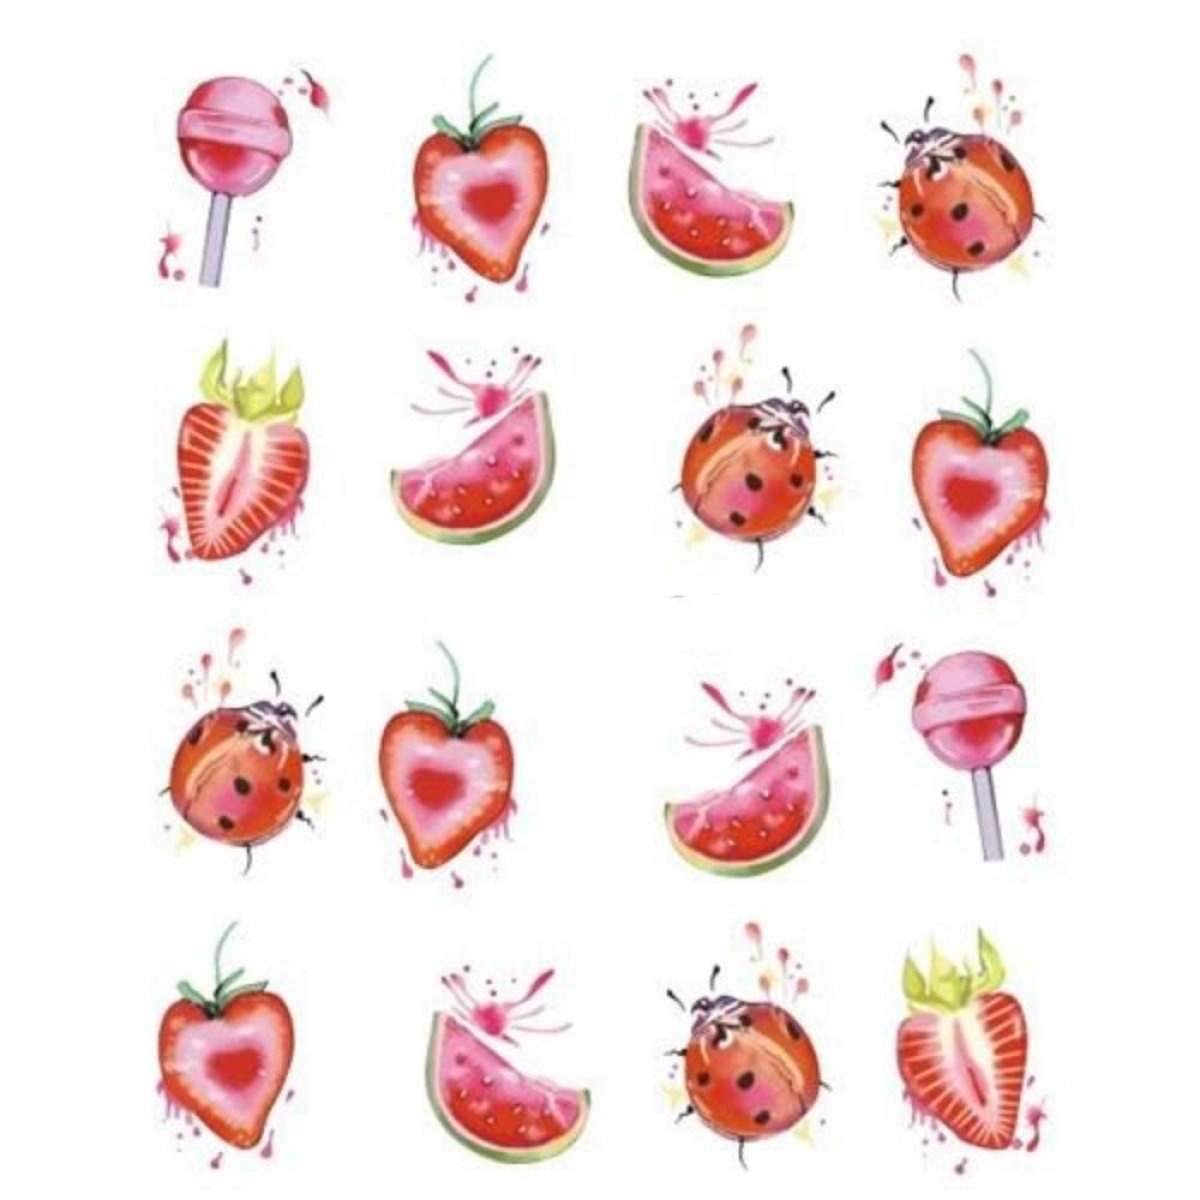 Strawberry Summer Cake & Fruit Stickers For Nails Nail Manicure Art Stz-489 - Sheet